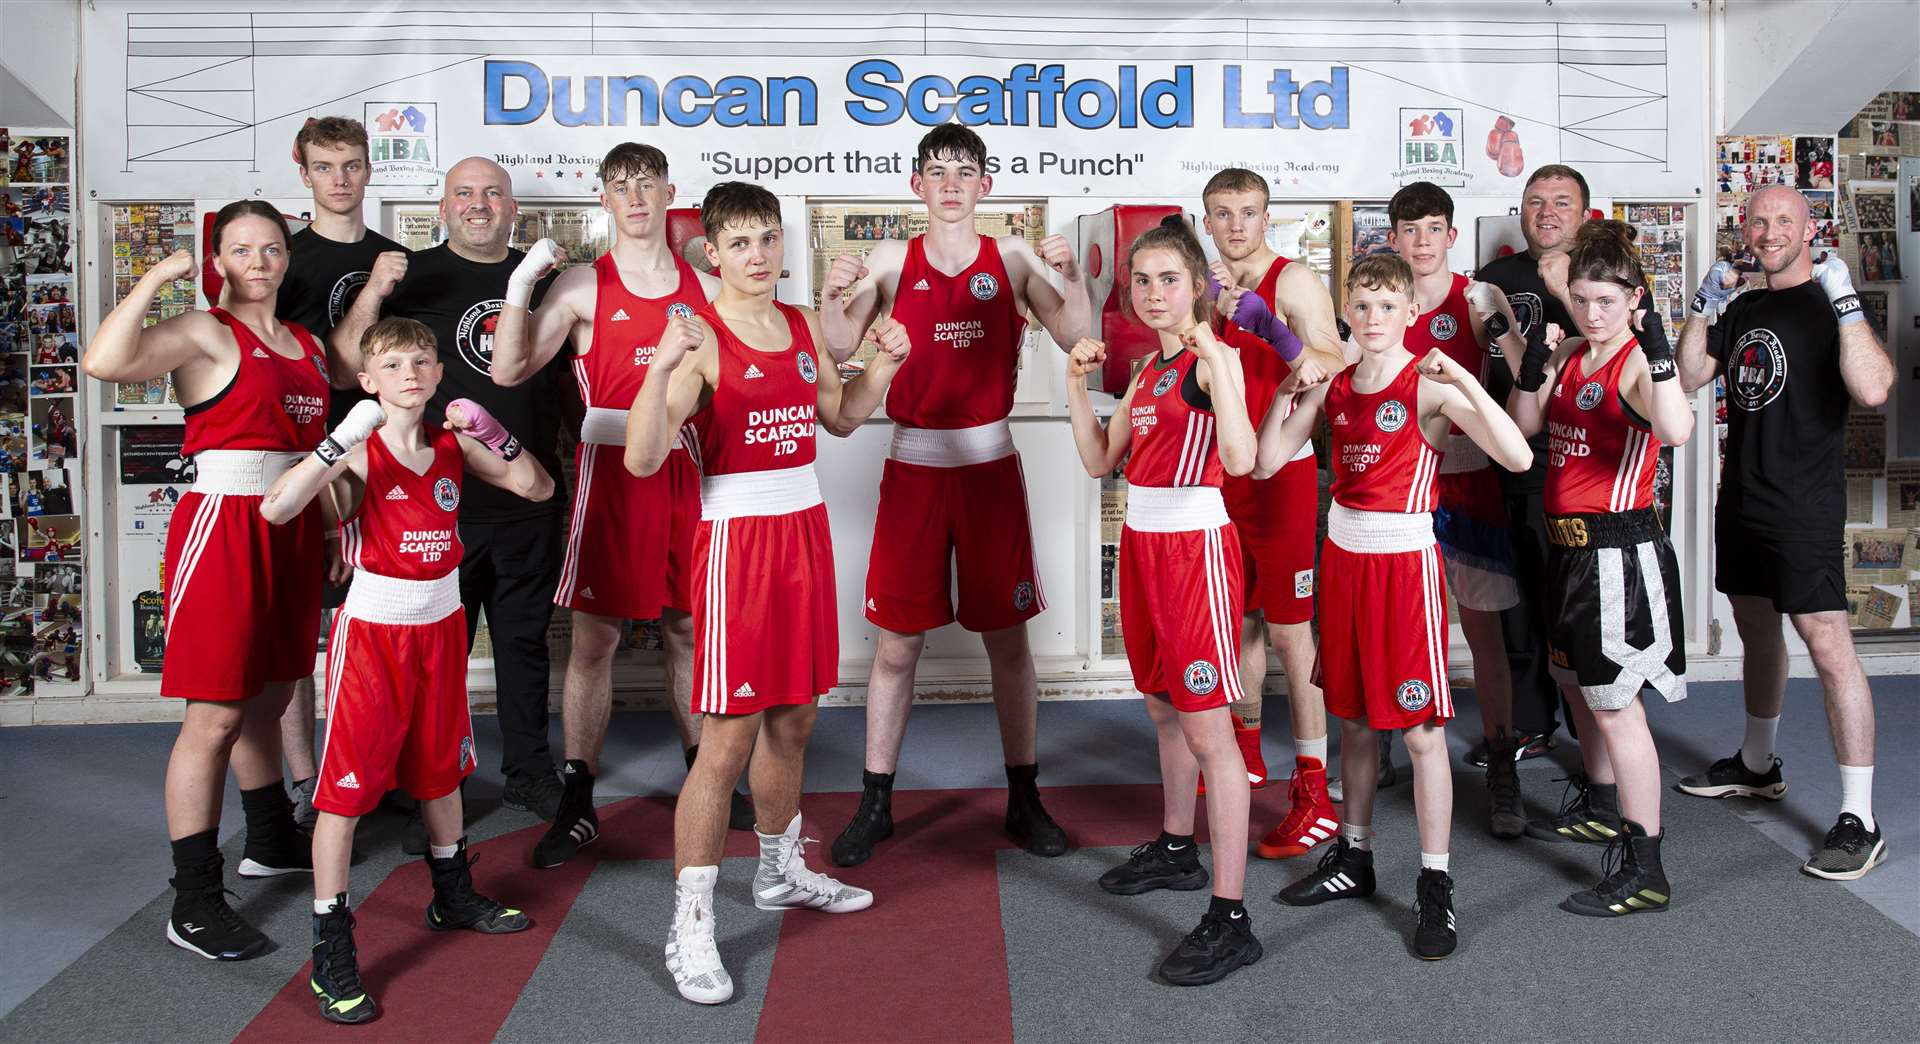 Highland Boxing Academy are sending 10 athletes to compete at the Lonsdale International Box Cup at the Emirates Arena in Glasgow.